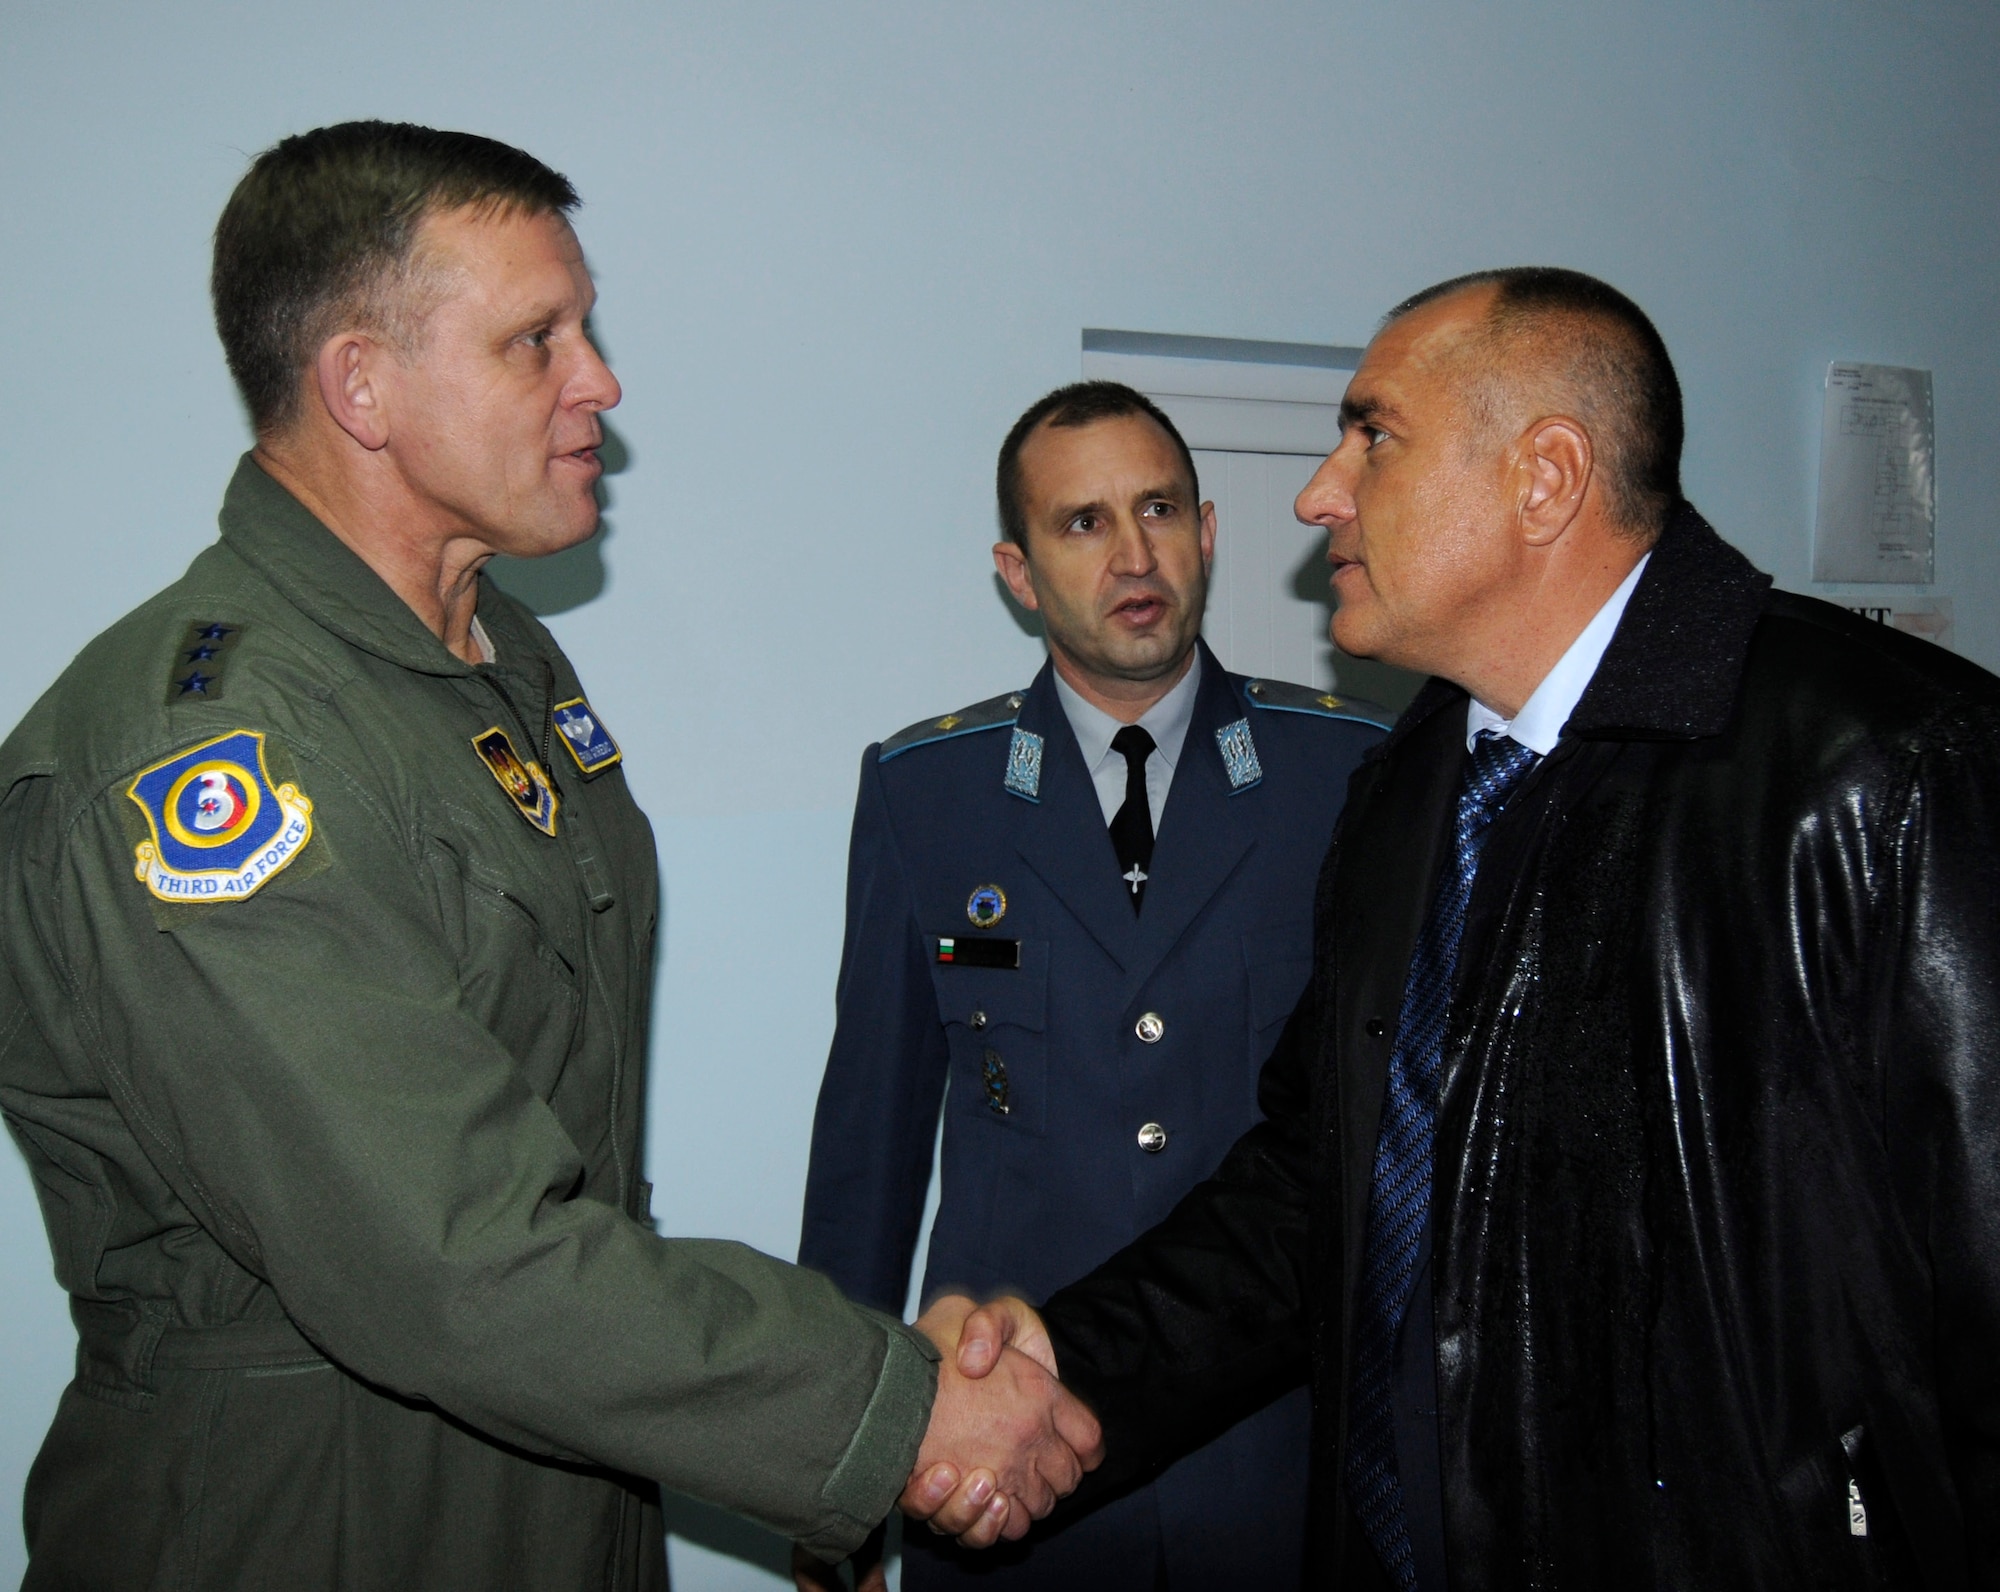 GRAF IGNATIEVO AIR FORCE BASE, Bulgaria - Lt. Gen. Frank Gorenc, left, 3rd Air Force commander, and Brig. Gen. Rumen Radev, center, Bulgarian air force deputy commander greet Bulgarian Prime Minister Boyko Borisov, as he arrives at Graf Ignatievo Air Force Base during Operation Thracian Star Oct. 14. The operation was a three-week, combined exercise that gave the U.S. and Bulgarian Air Forces the opportunity to share ideas and train together. (U.S. Air Force photo/Staff Sgt. Benjamin Wilson)